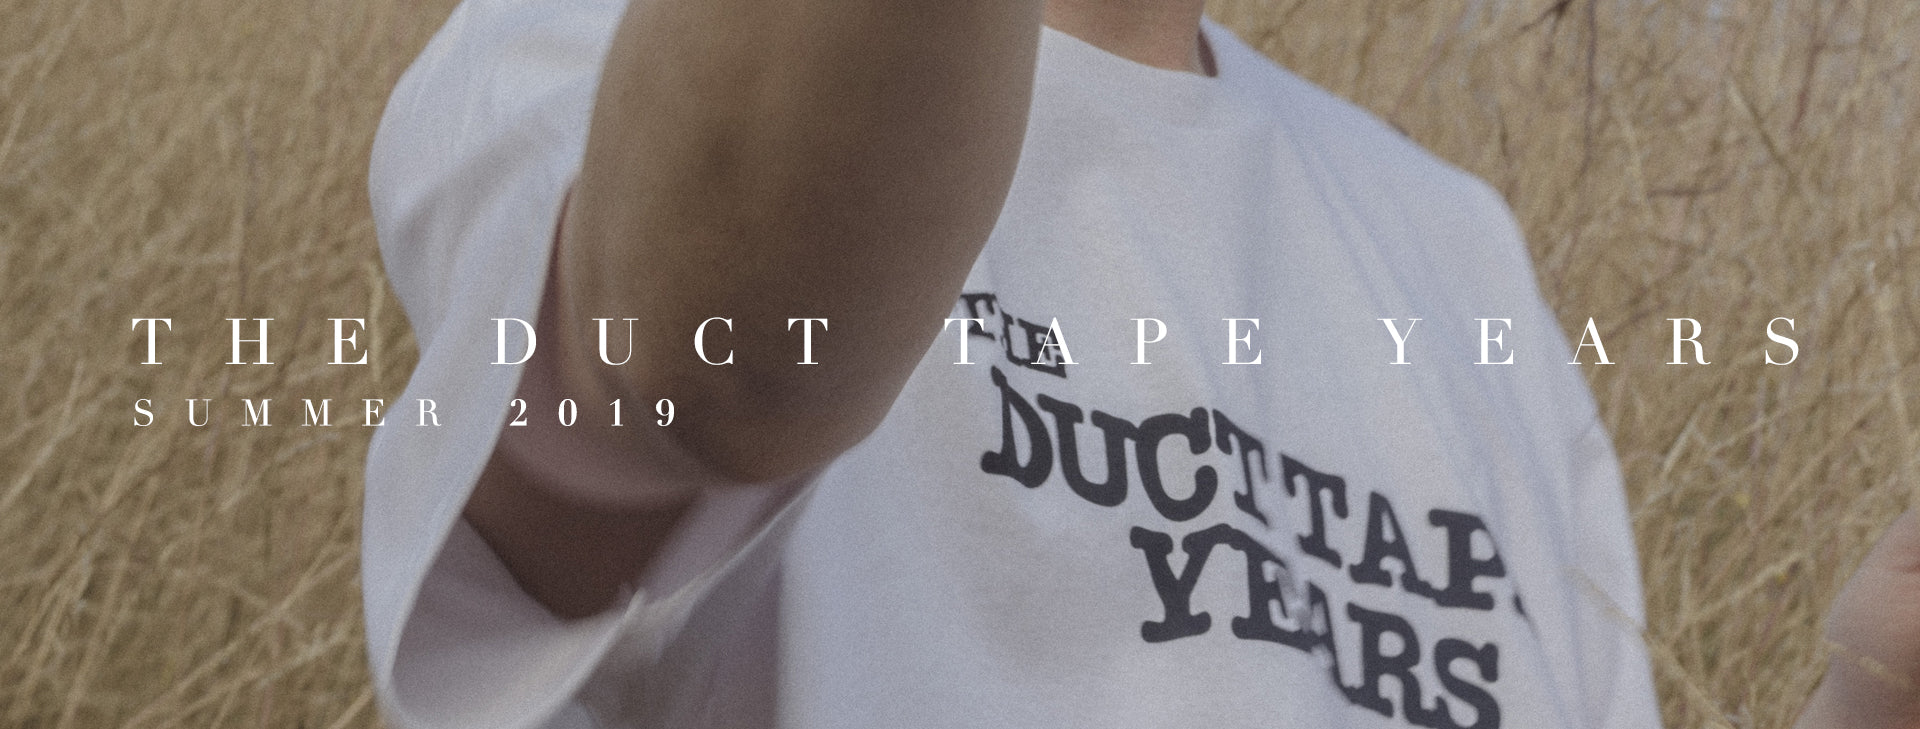 The Duct Tape Years Summer 2019